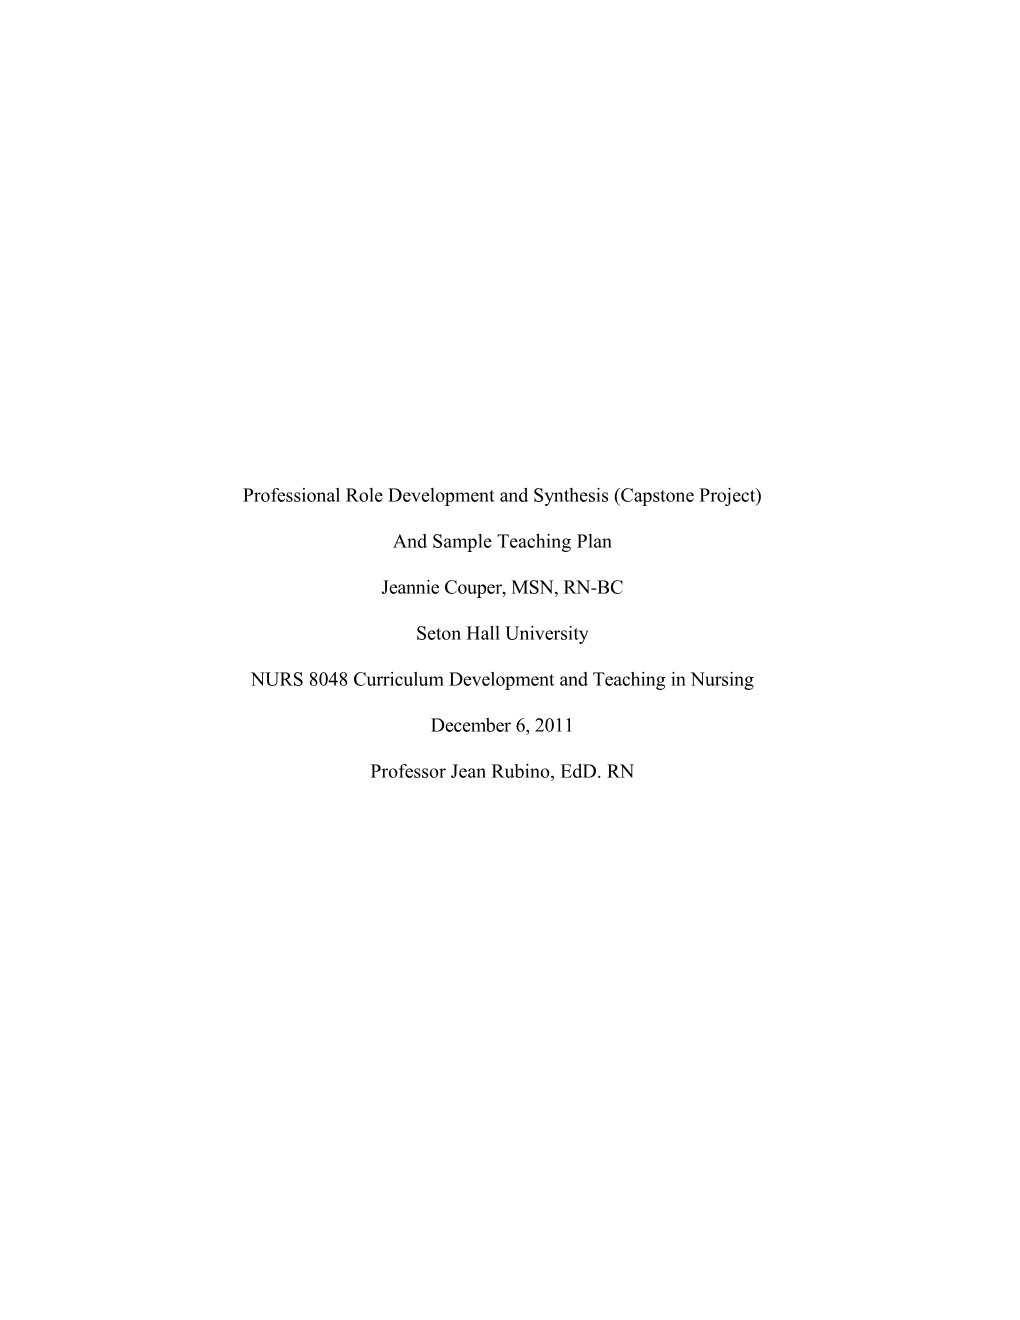 Professional Role Development and Synthesis (Capstone Project)